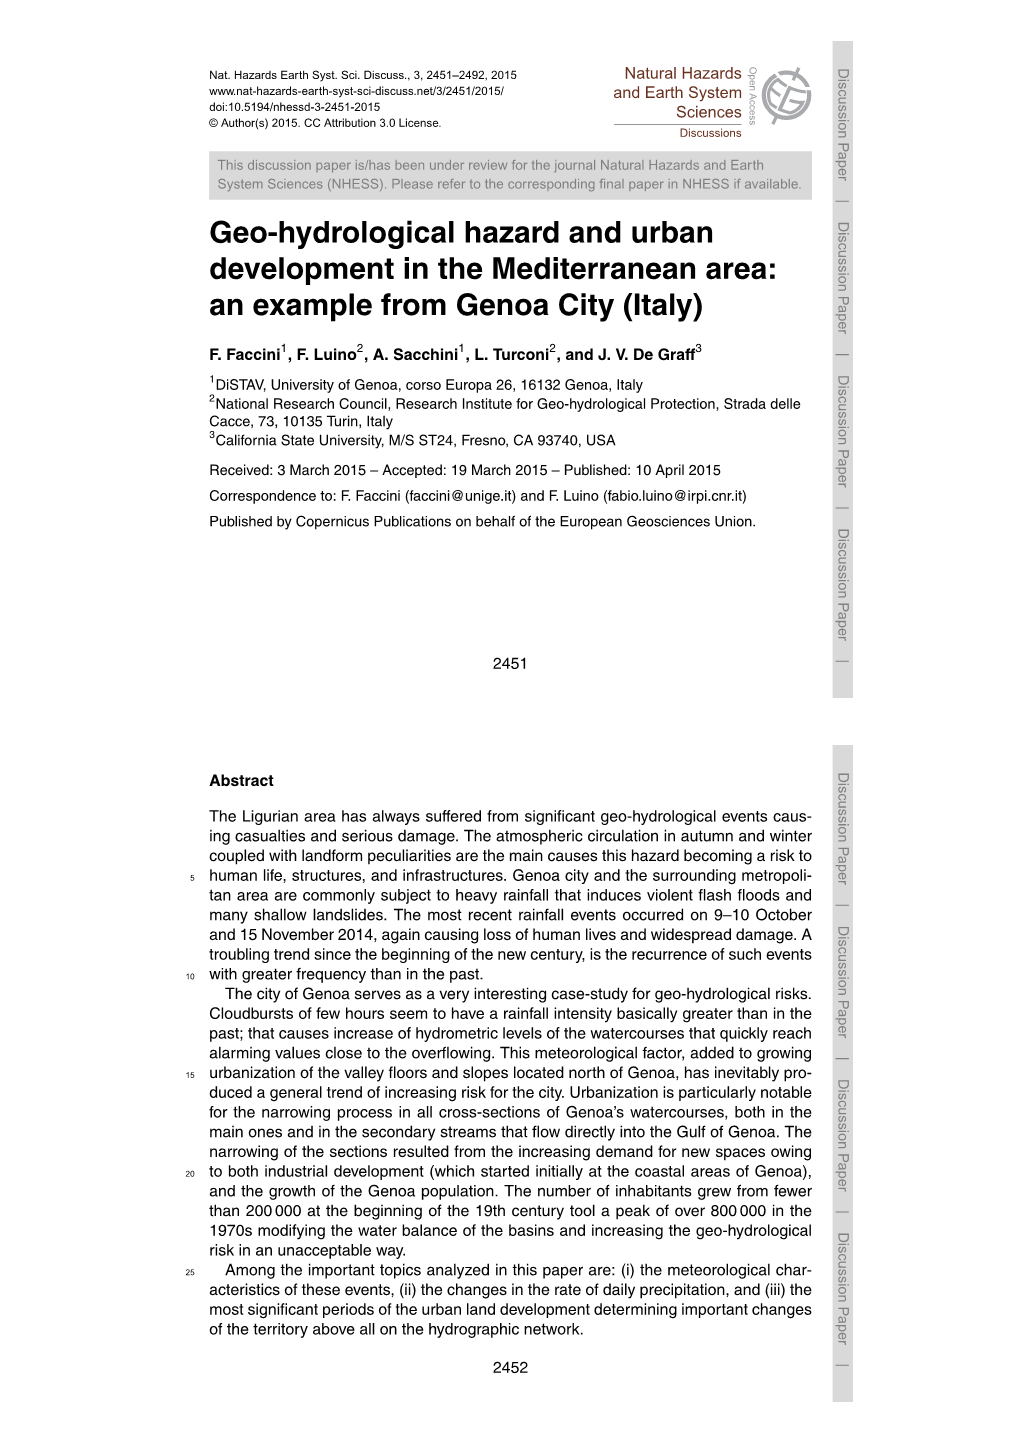 Geo-Hydrological Hazard and Urban Development in the Mediterranean Area: an Example from Genoa City (Italy) F